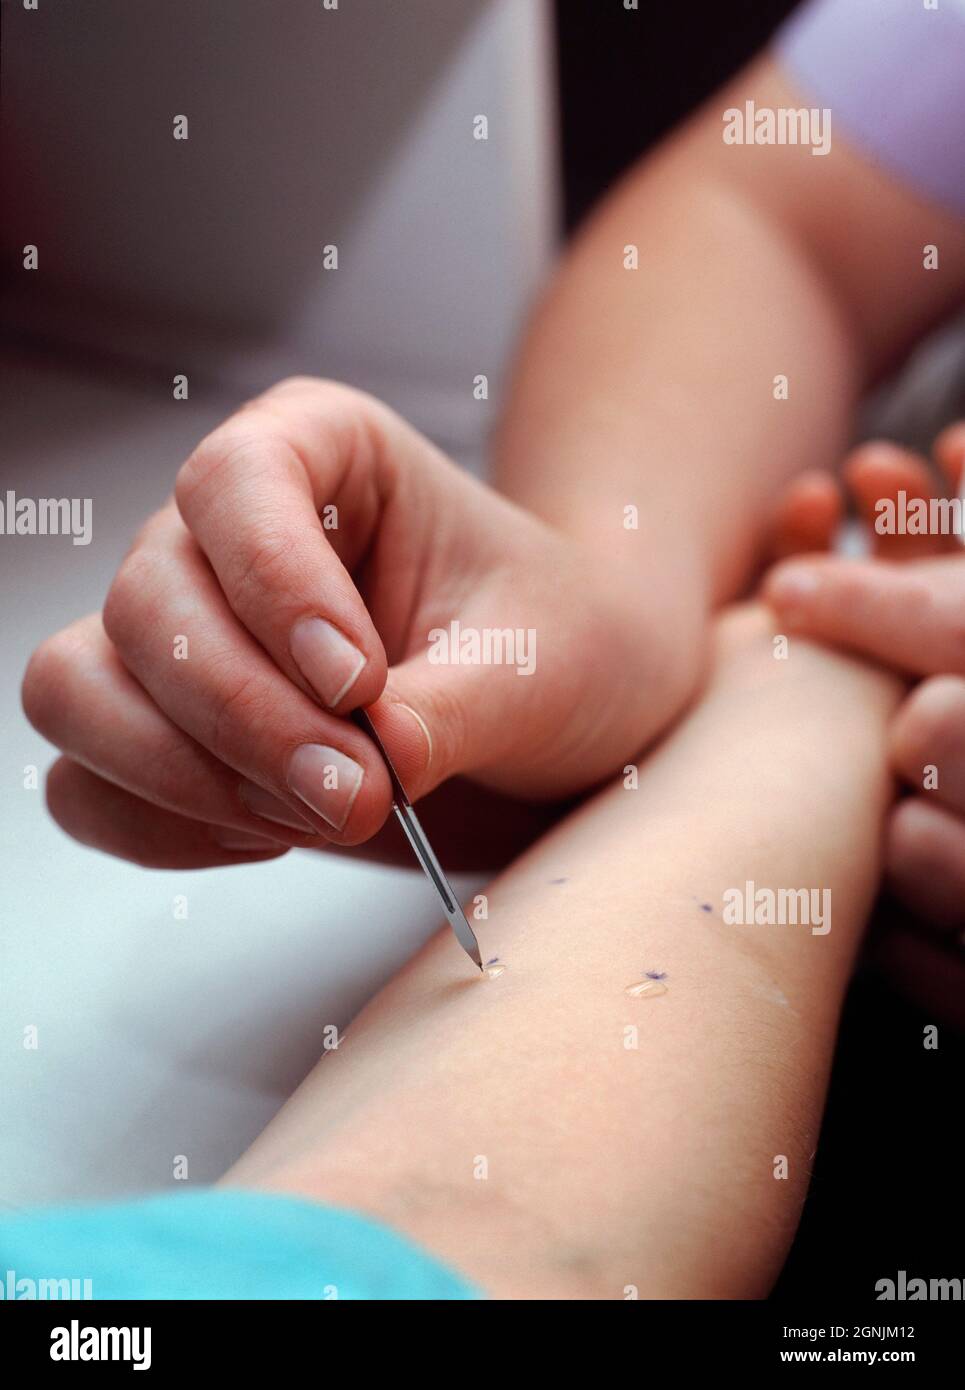 Allergist applies minute amounts of potential allergen extracts to the forearm skin of a young man. Stock Photo